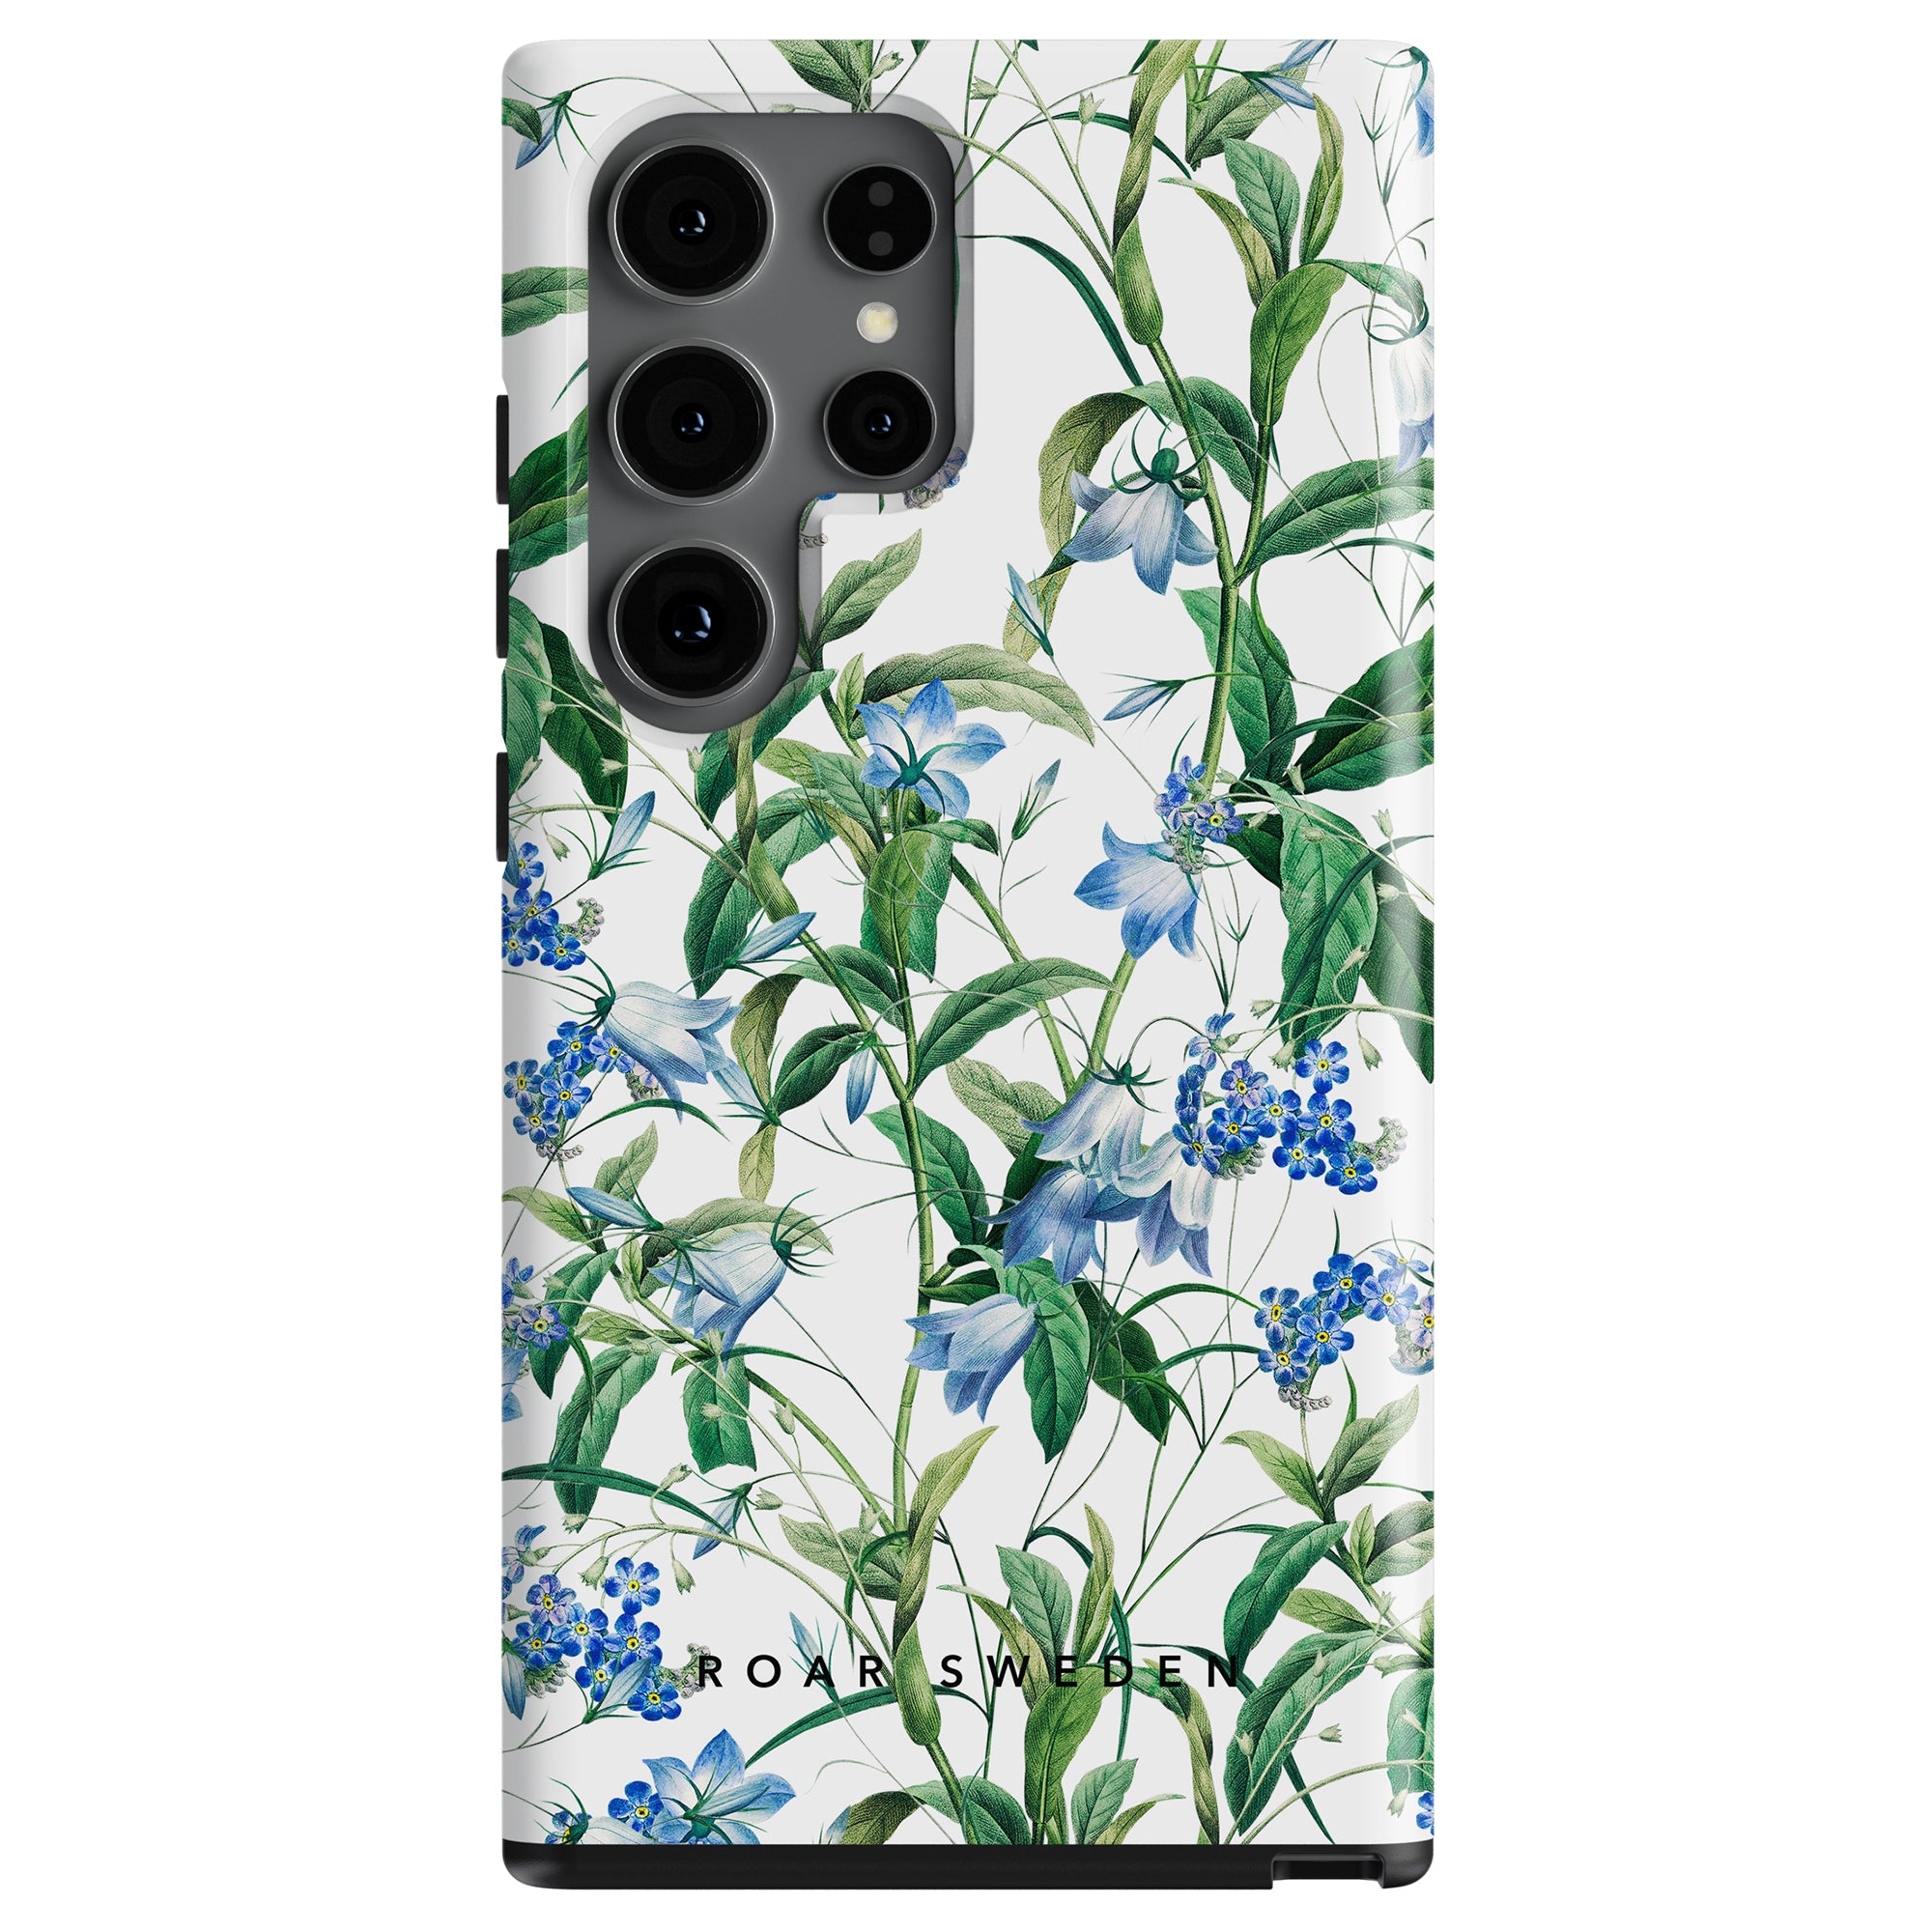 A smartphone with a floral patterned case featuring blue flowers and green leaves, known as the Blue Bells - Tough Case for optimal smartphone skydd.